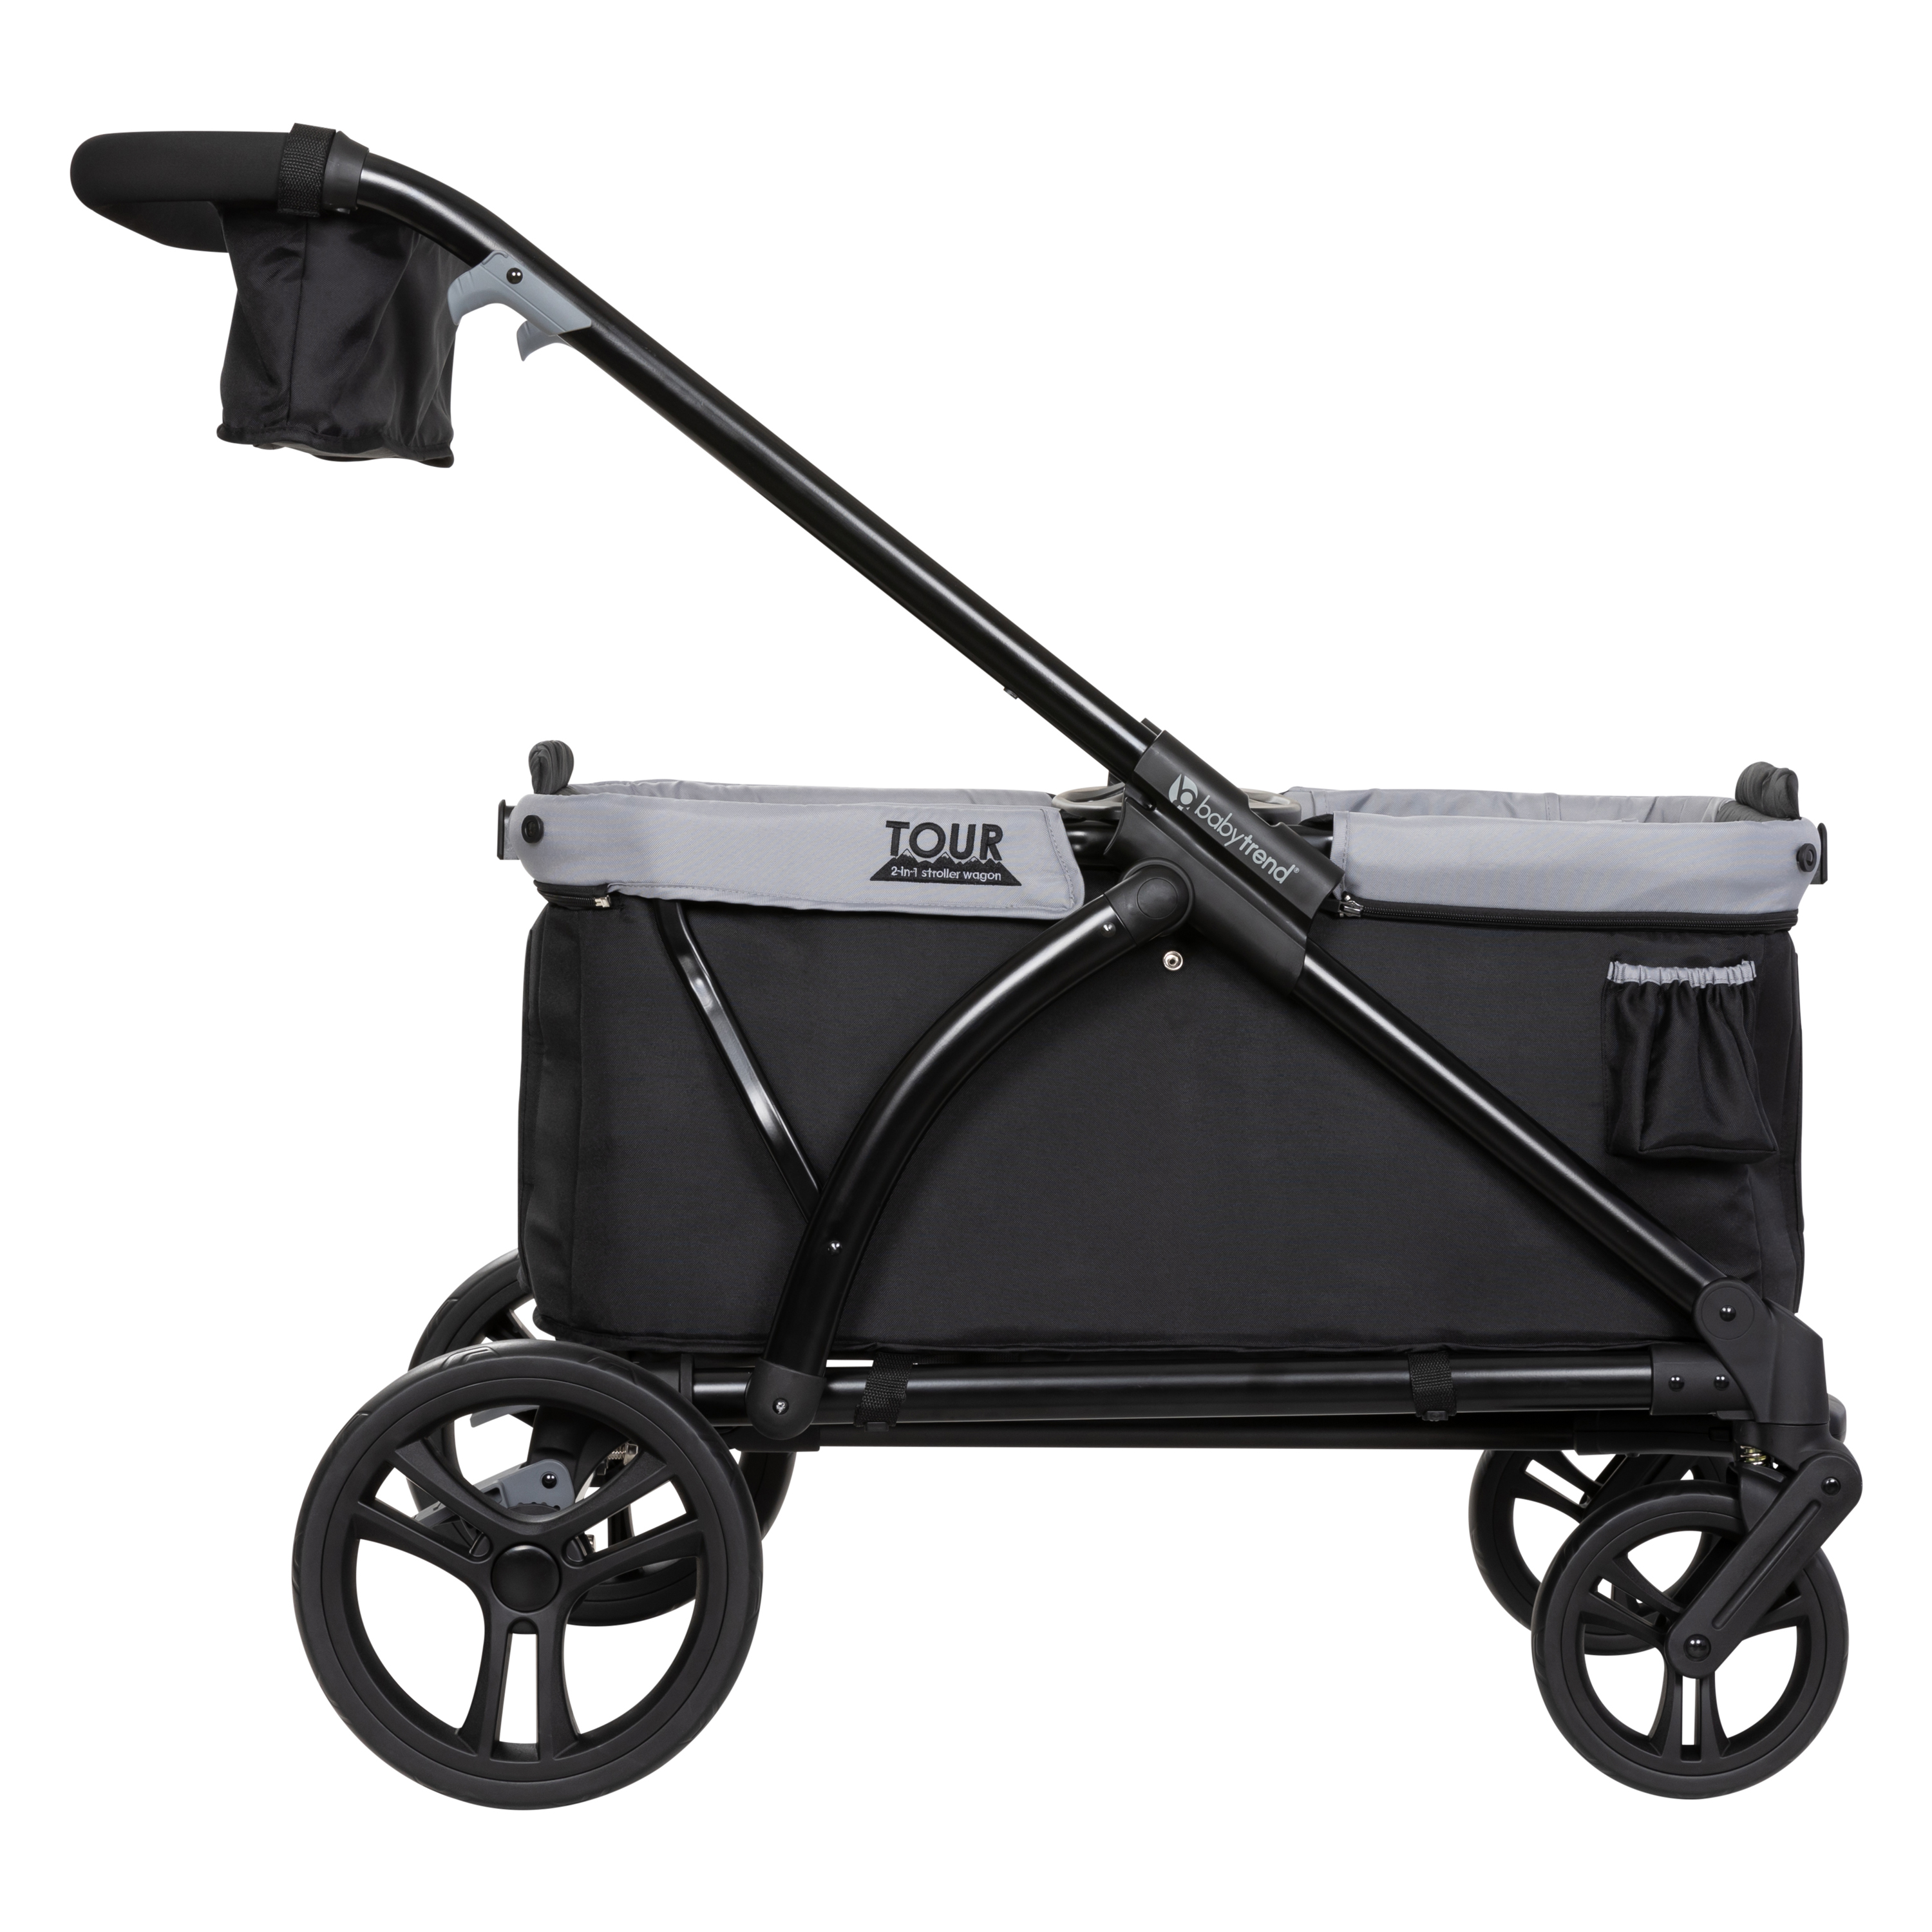 Baby Trend Tour Wagon Stroller, Black - image 4 of 18